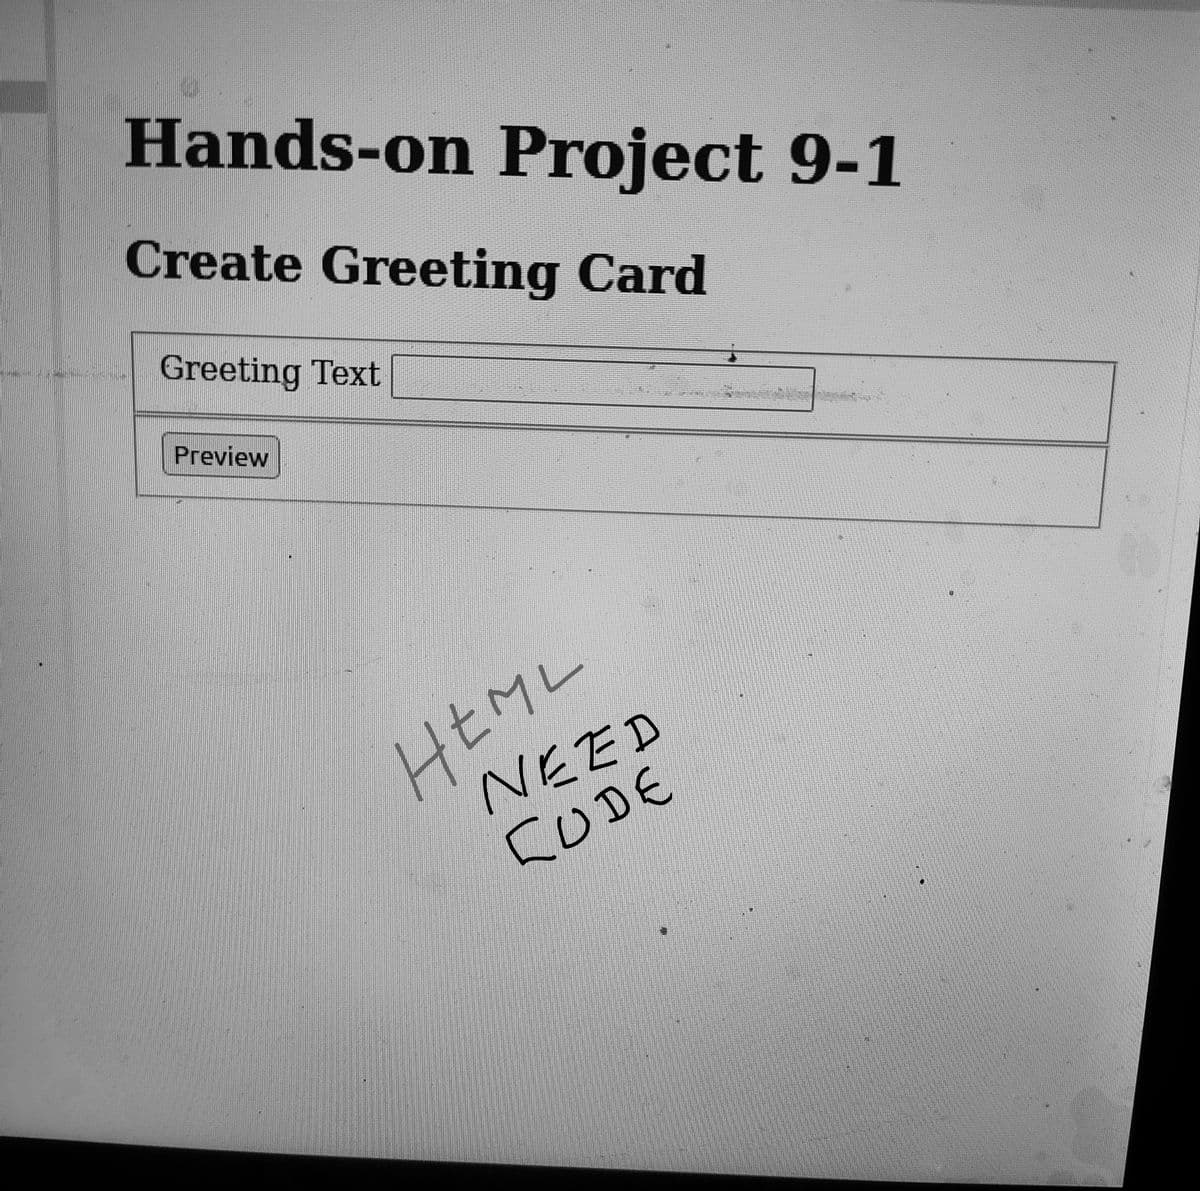 Hands-on Project 9-1
Create Greeting Card
Greeting Text
Preview
HEML
NEED
CUDE
